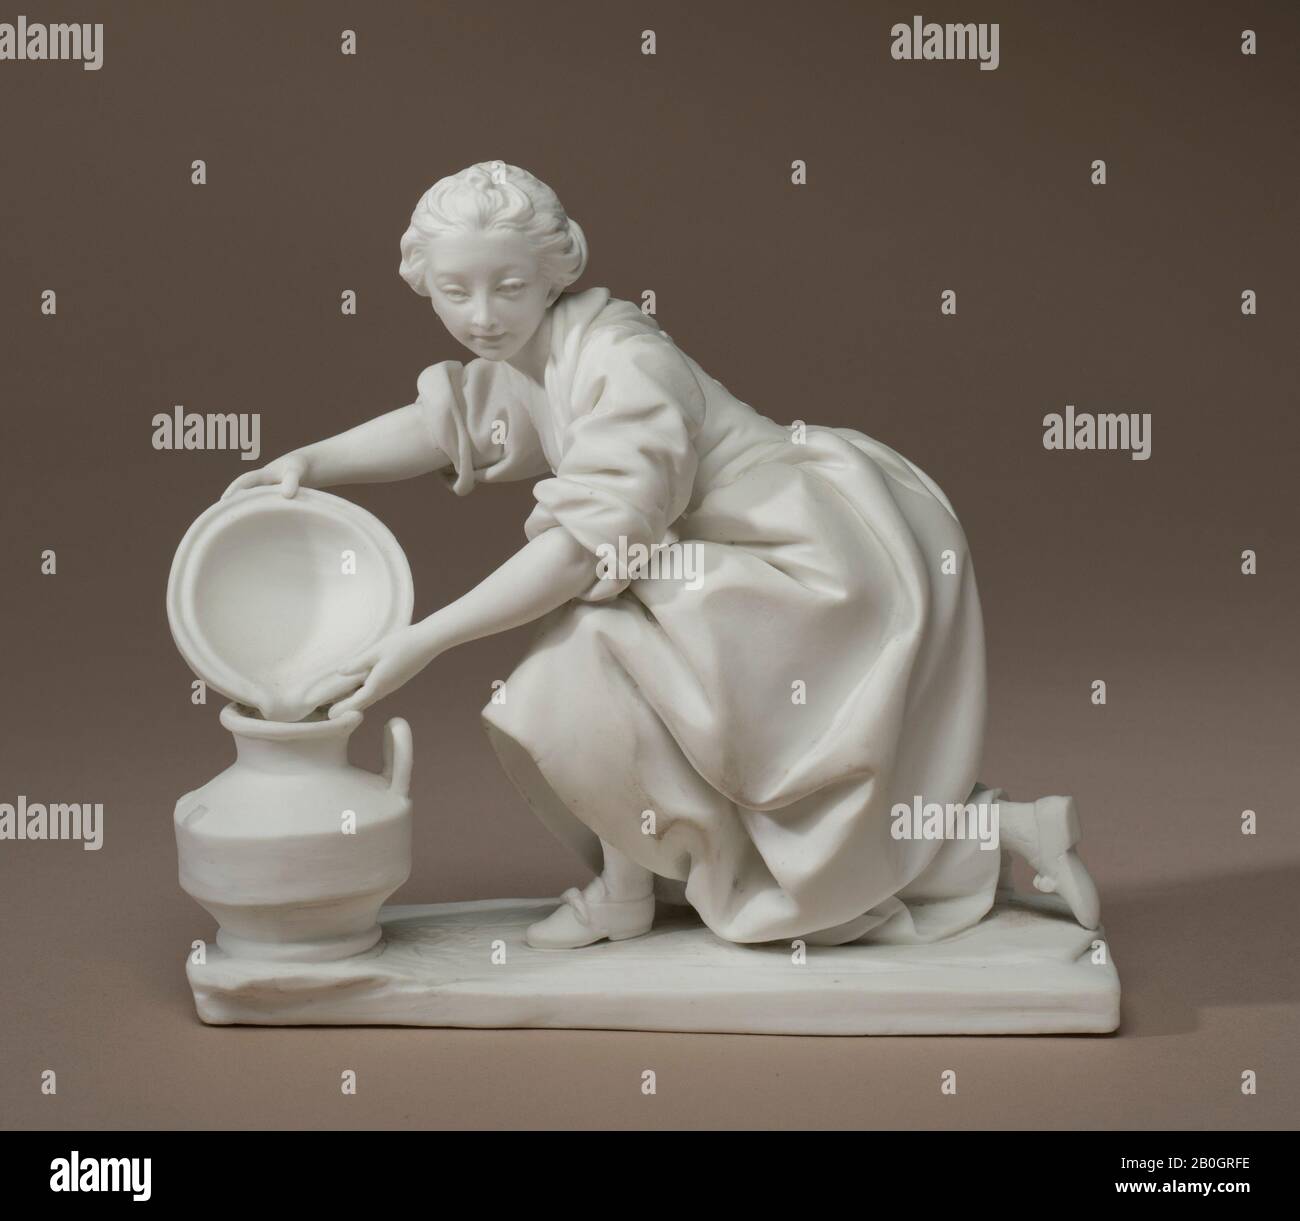 Sèvres Porcelain Manufactory, French, 1756–present, The Dairy Maid, c. 1757–c. 1766, Soft-paste porcelain (biscuit), Height: 5 13/16 in. (14.8 cm Stock Photo